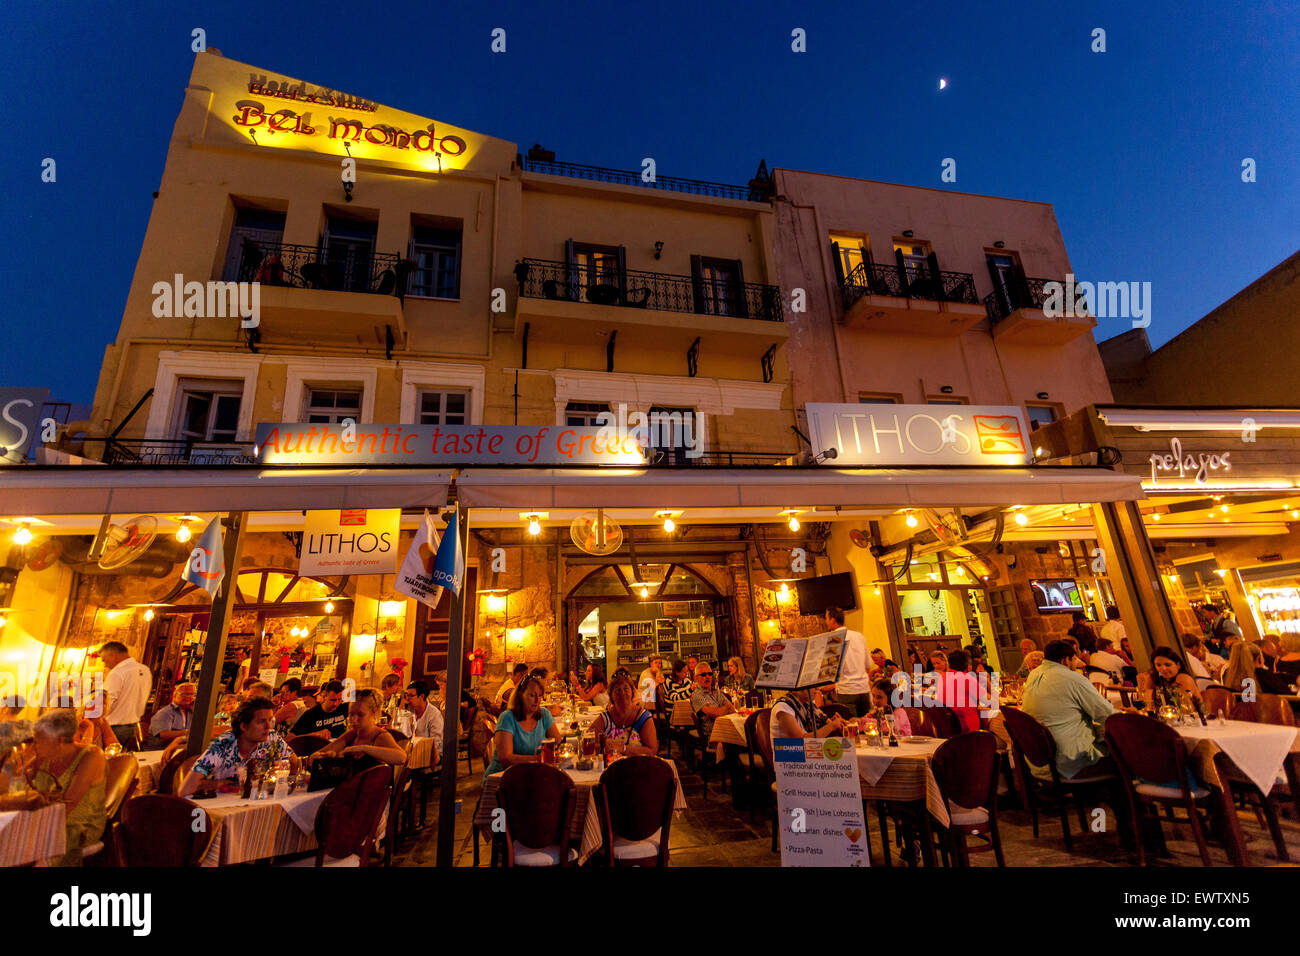 Chania bar Crete, Greece, Cafe in Old Venetian harbour at night Stock Photo